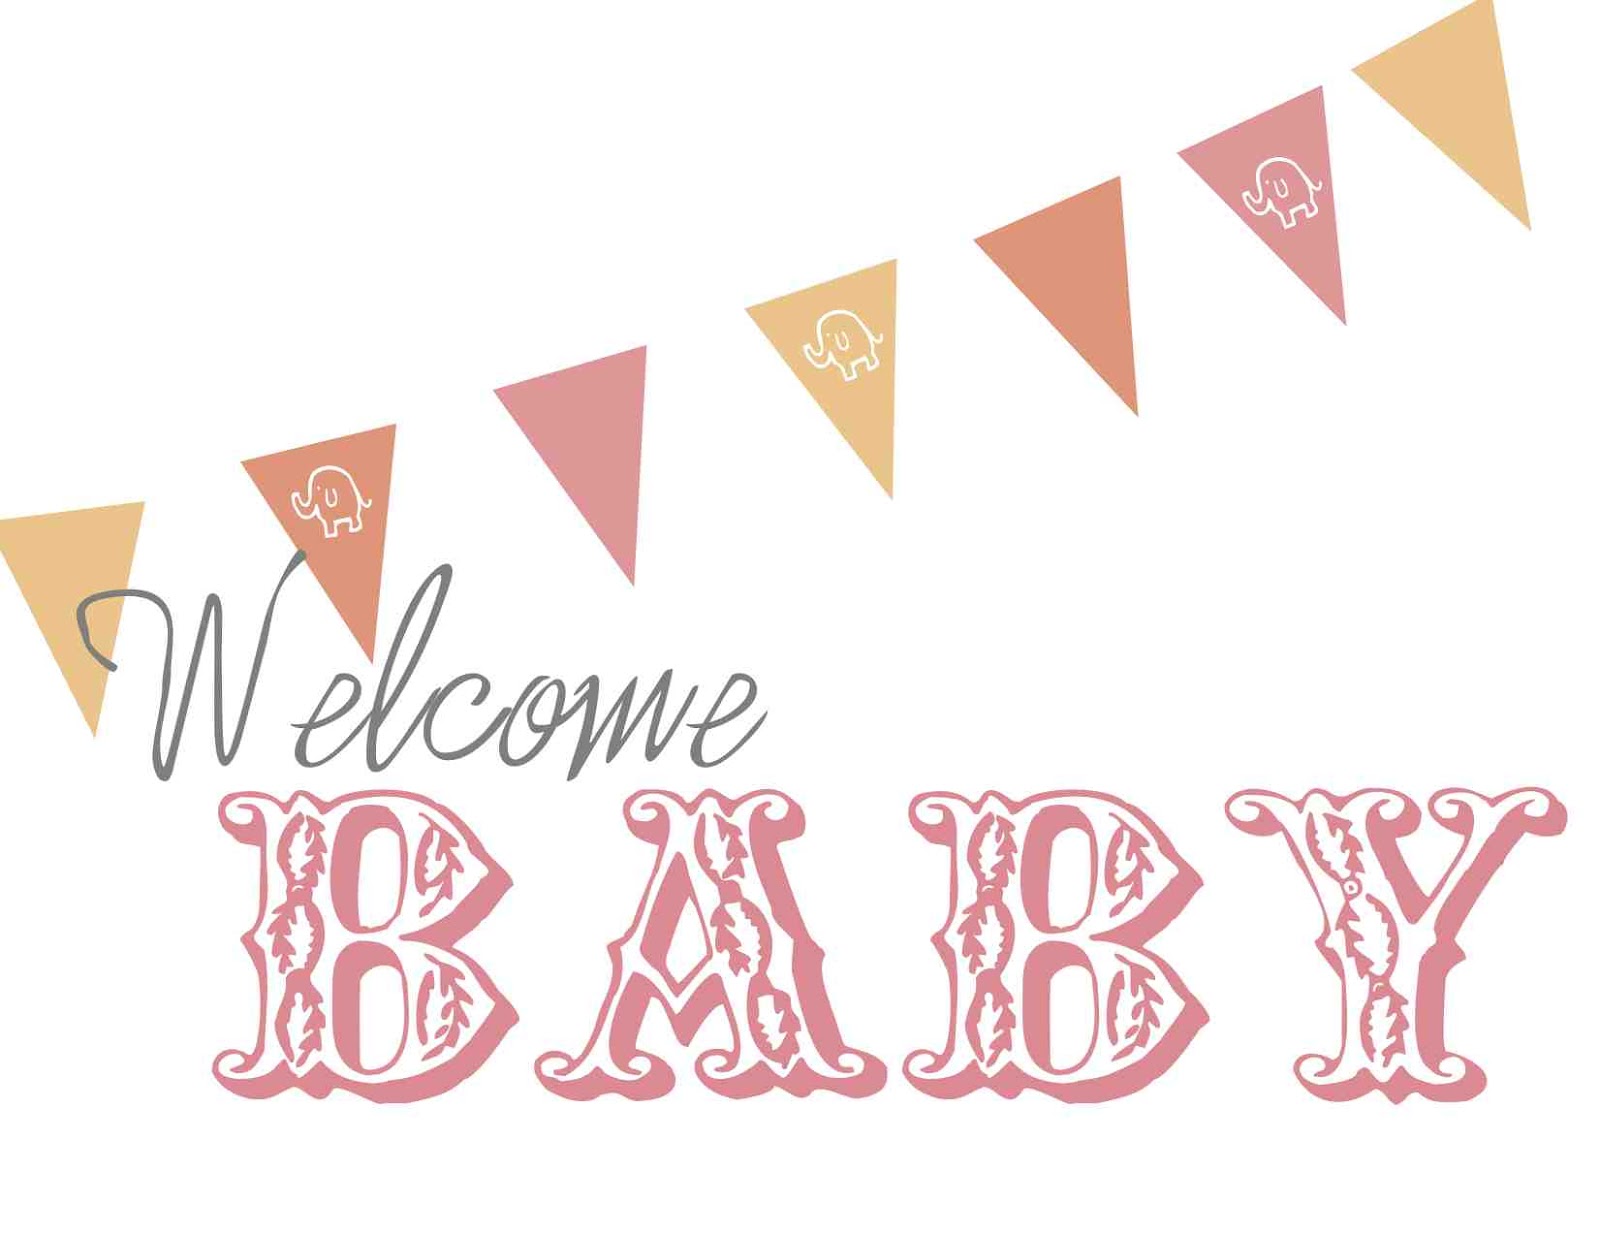 Full Size of Baby Shower:89+ Indulging Baby Shower Banner Picture Inspirations Baby Shower De With Martha Stewart Baby Shower Plus My Baby Shower Together With Cosas De Baby Shower